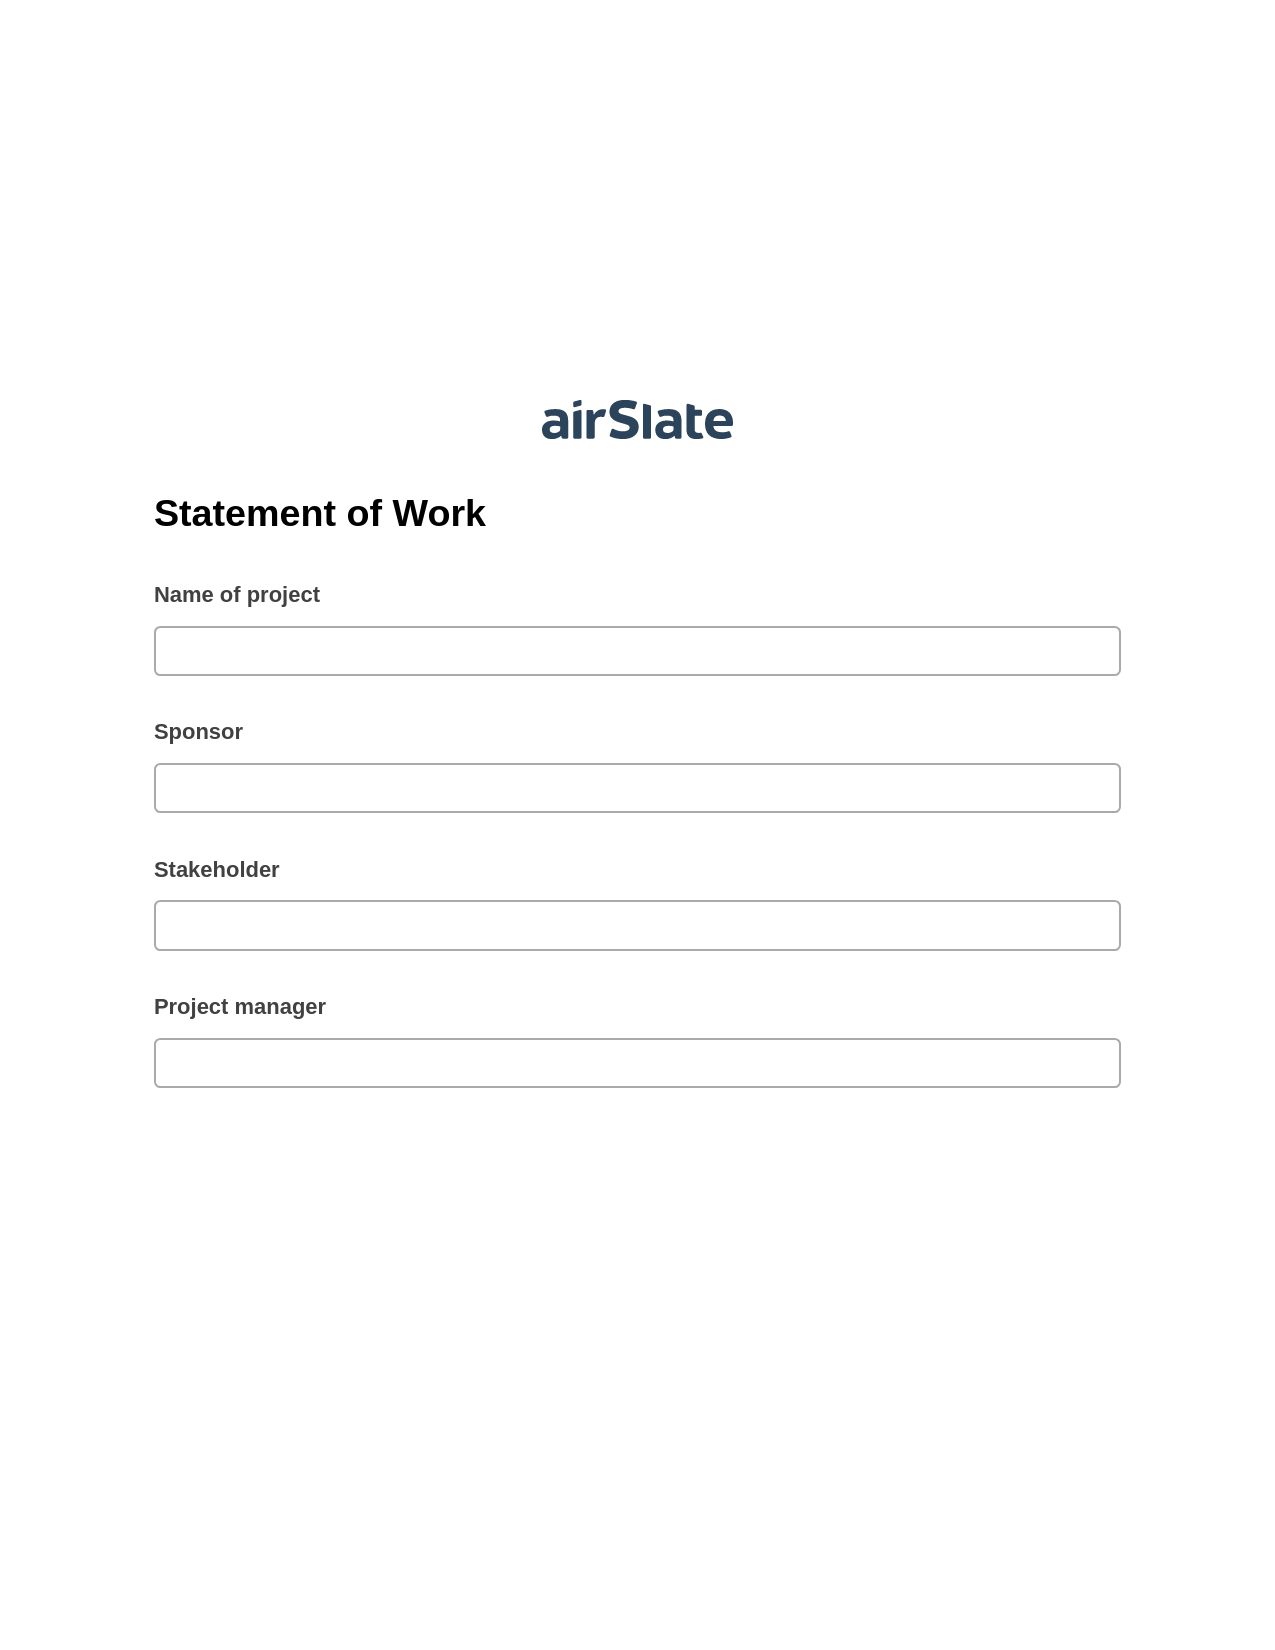 Statement of Work Pre-fill from Excel Spreadsheet Dropdown Options Bot, Send a Slate to Salesforce Contact Bot, Slack Notification Postfinish Bot